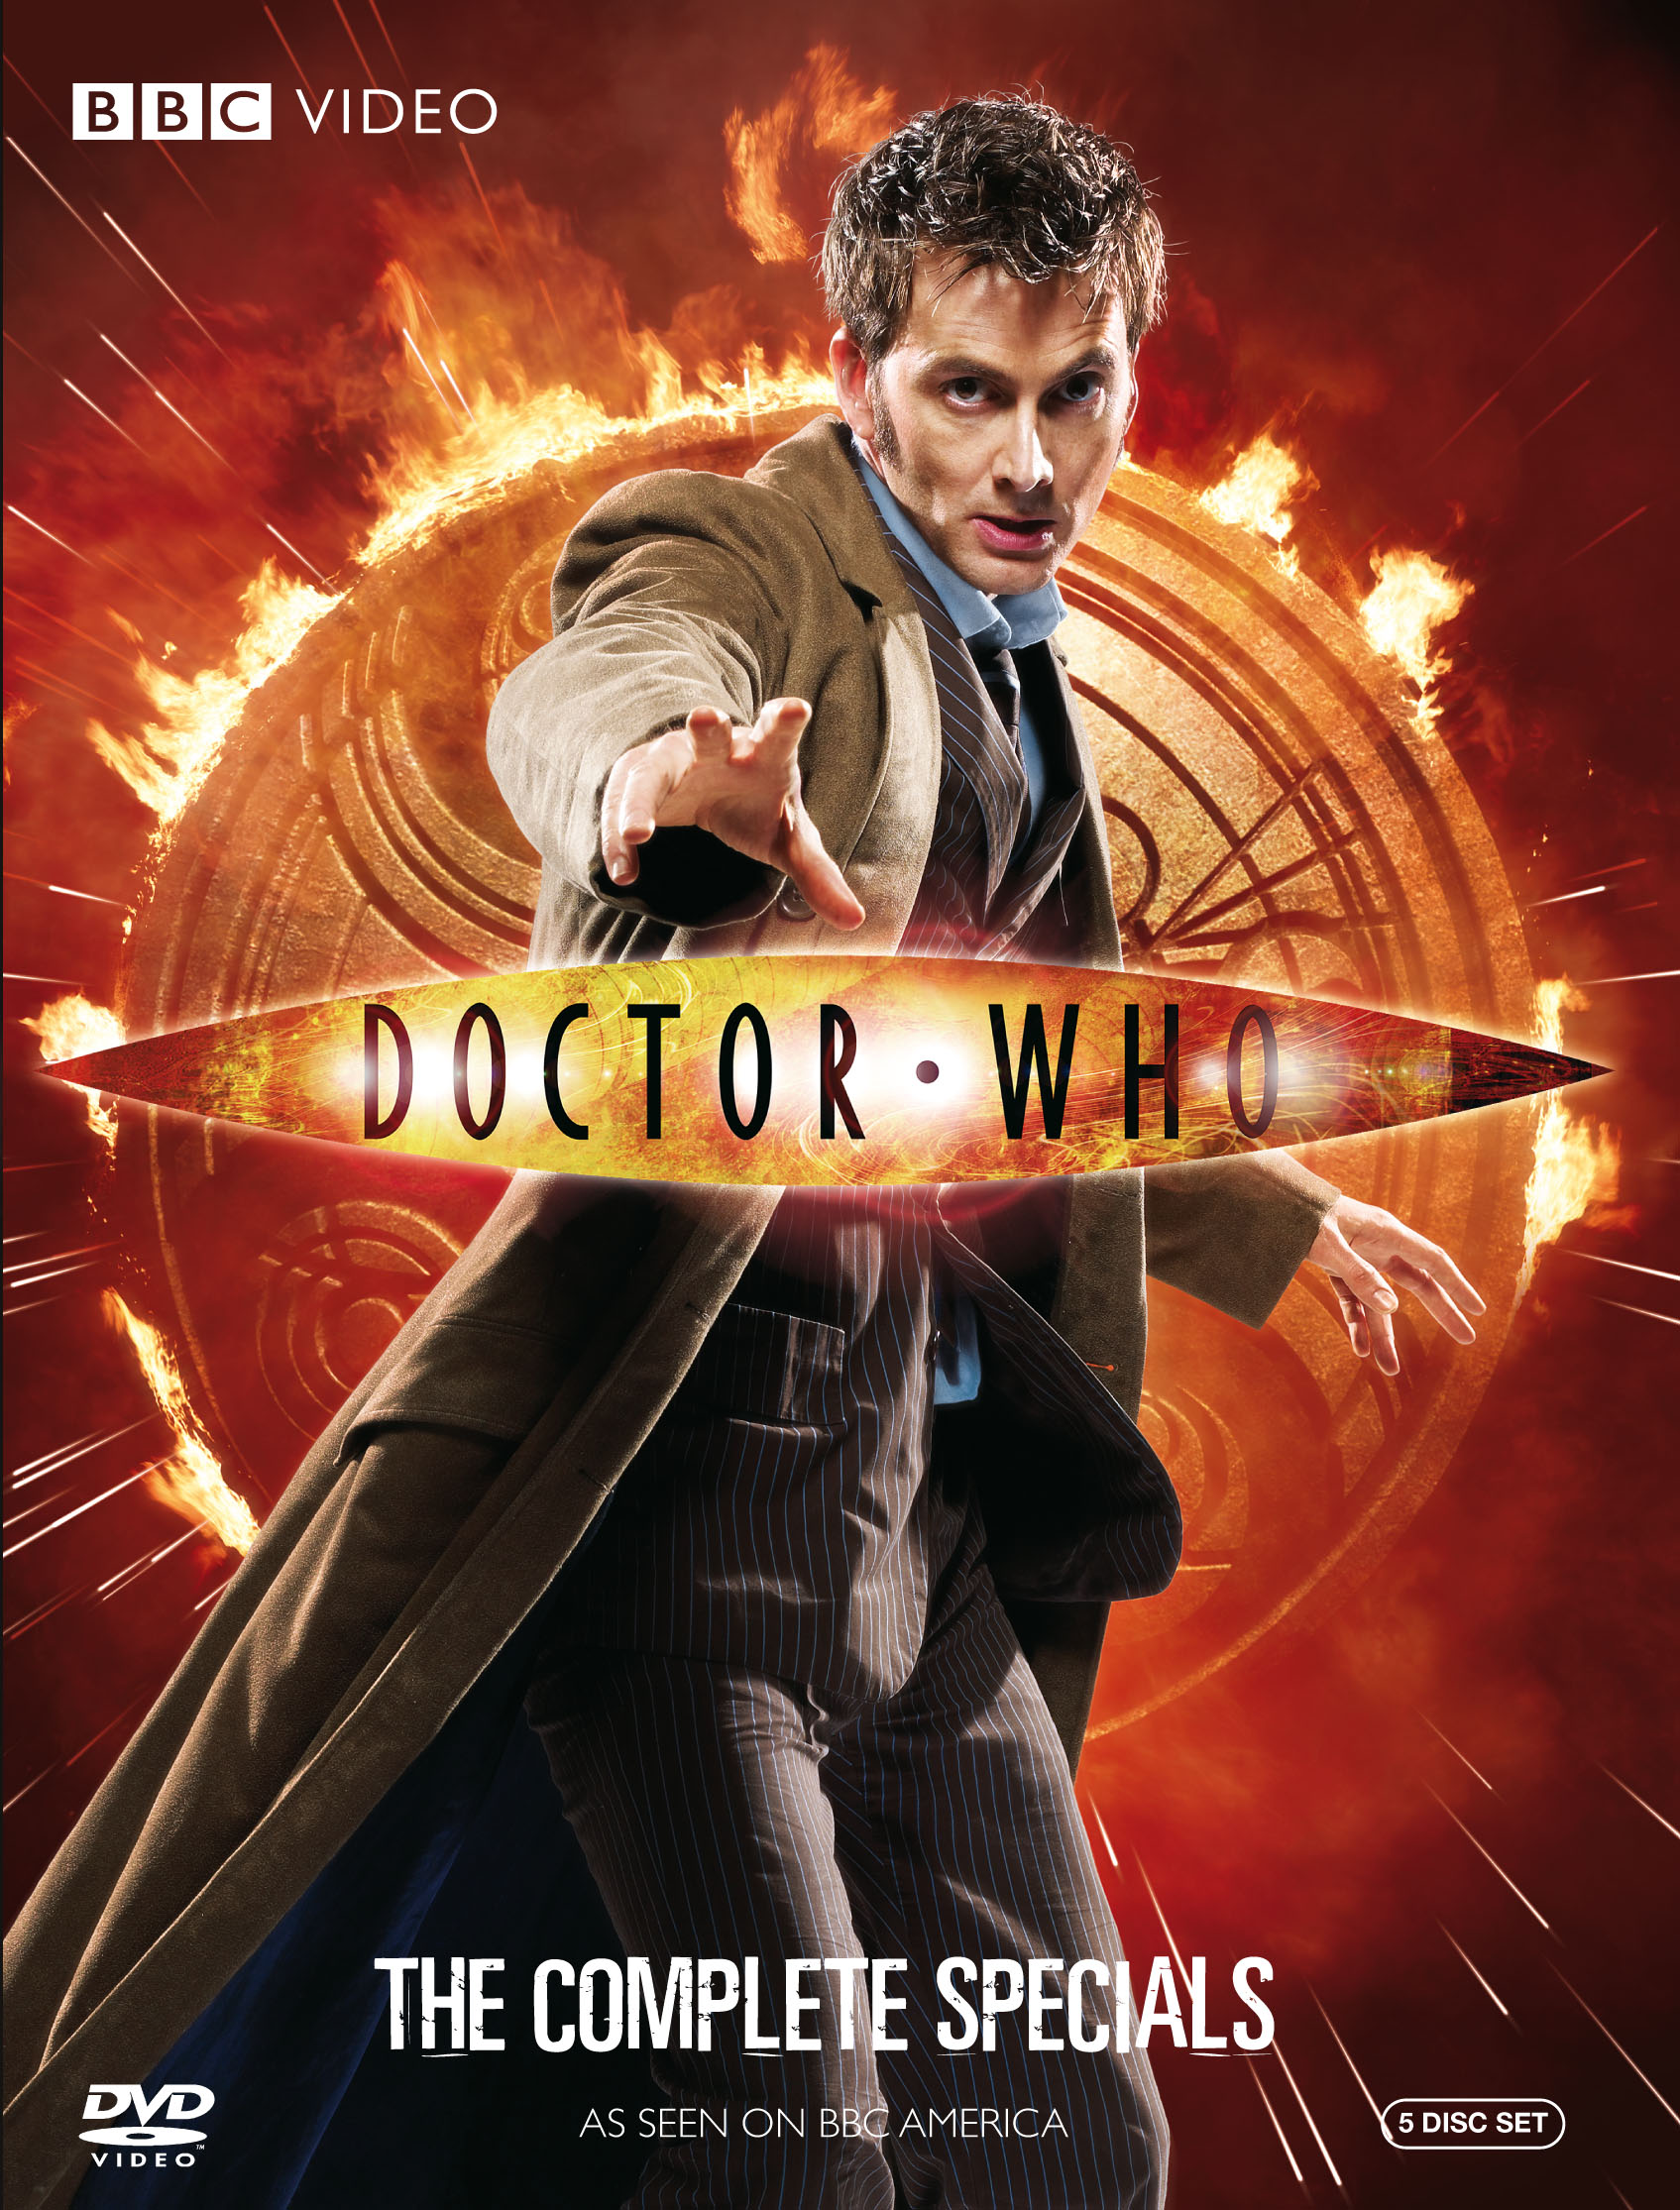 Doctor Who series 4 - Wikipedia